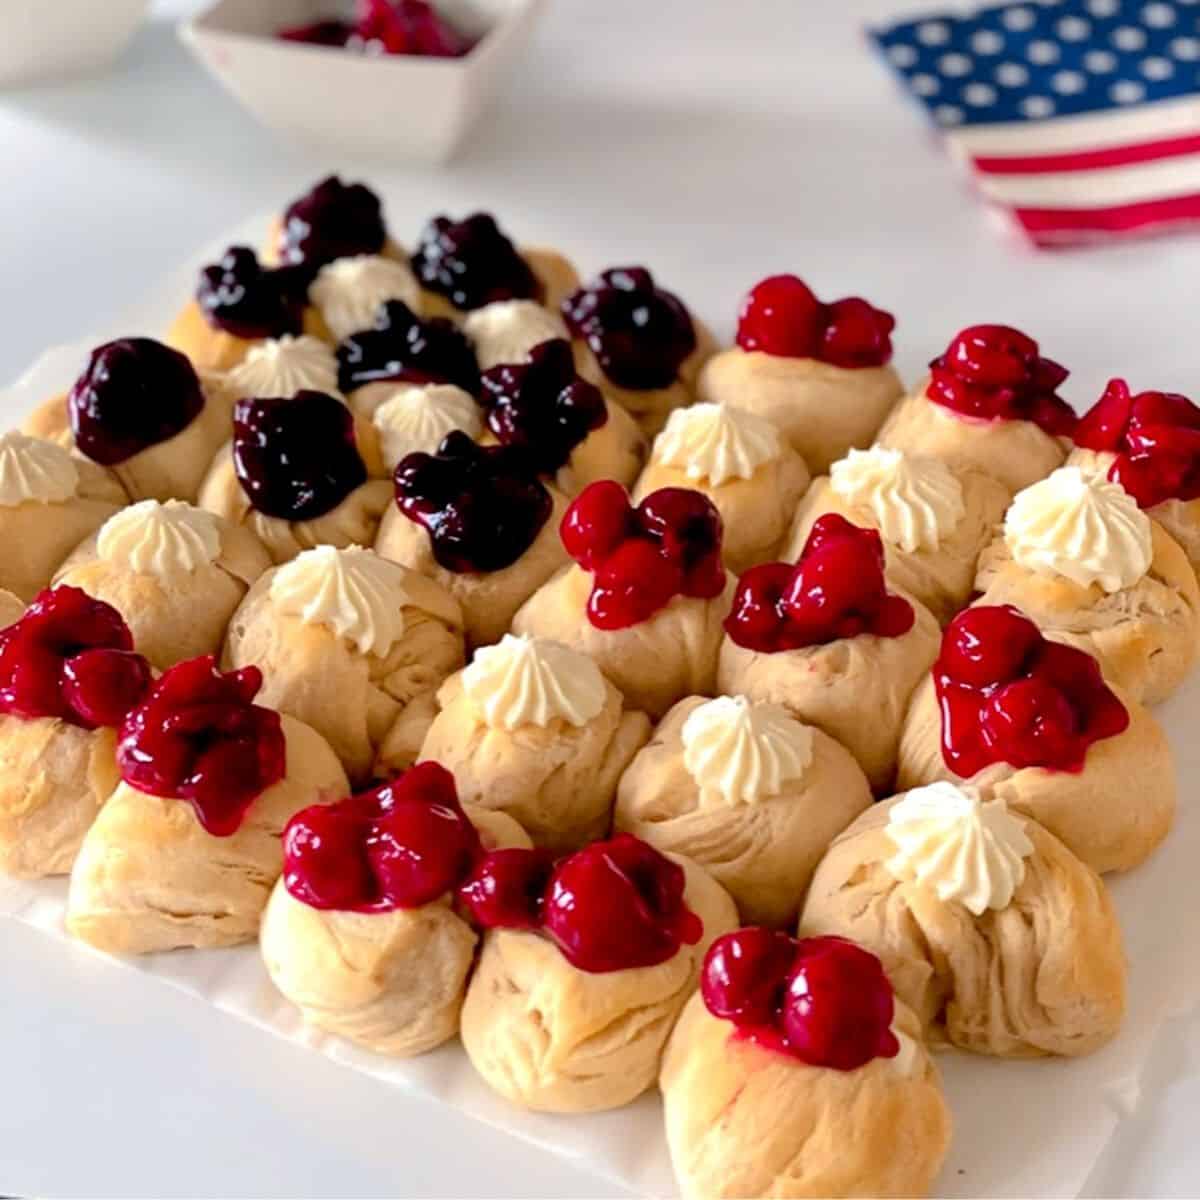 red, white and blue american flag dessert on table.